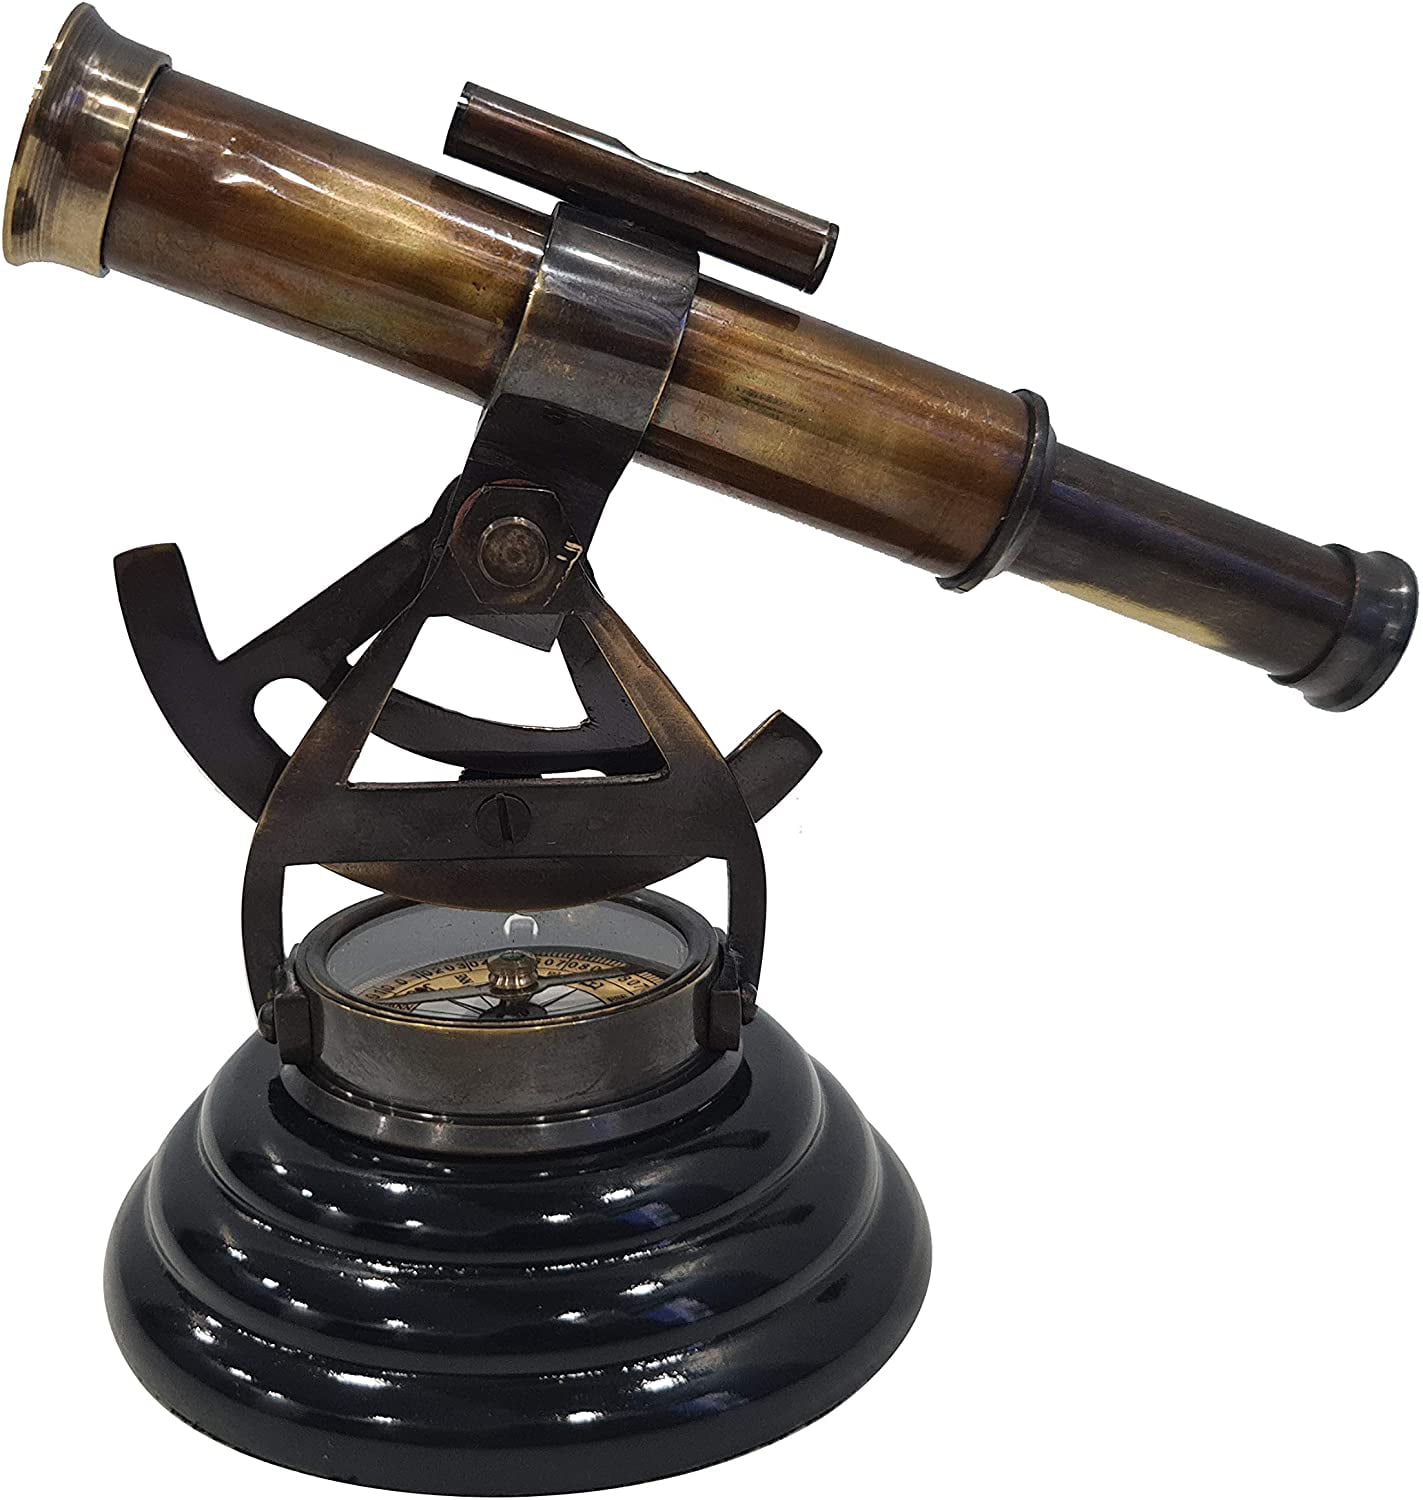 Details about   Collectibles Antique Brass Nautical Alidade Telescope Compass Surveying 